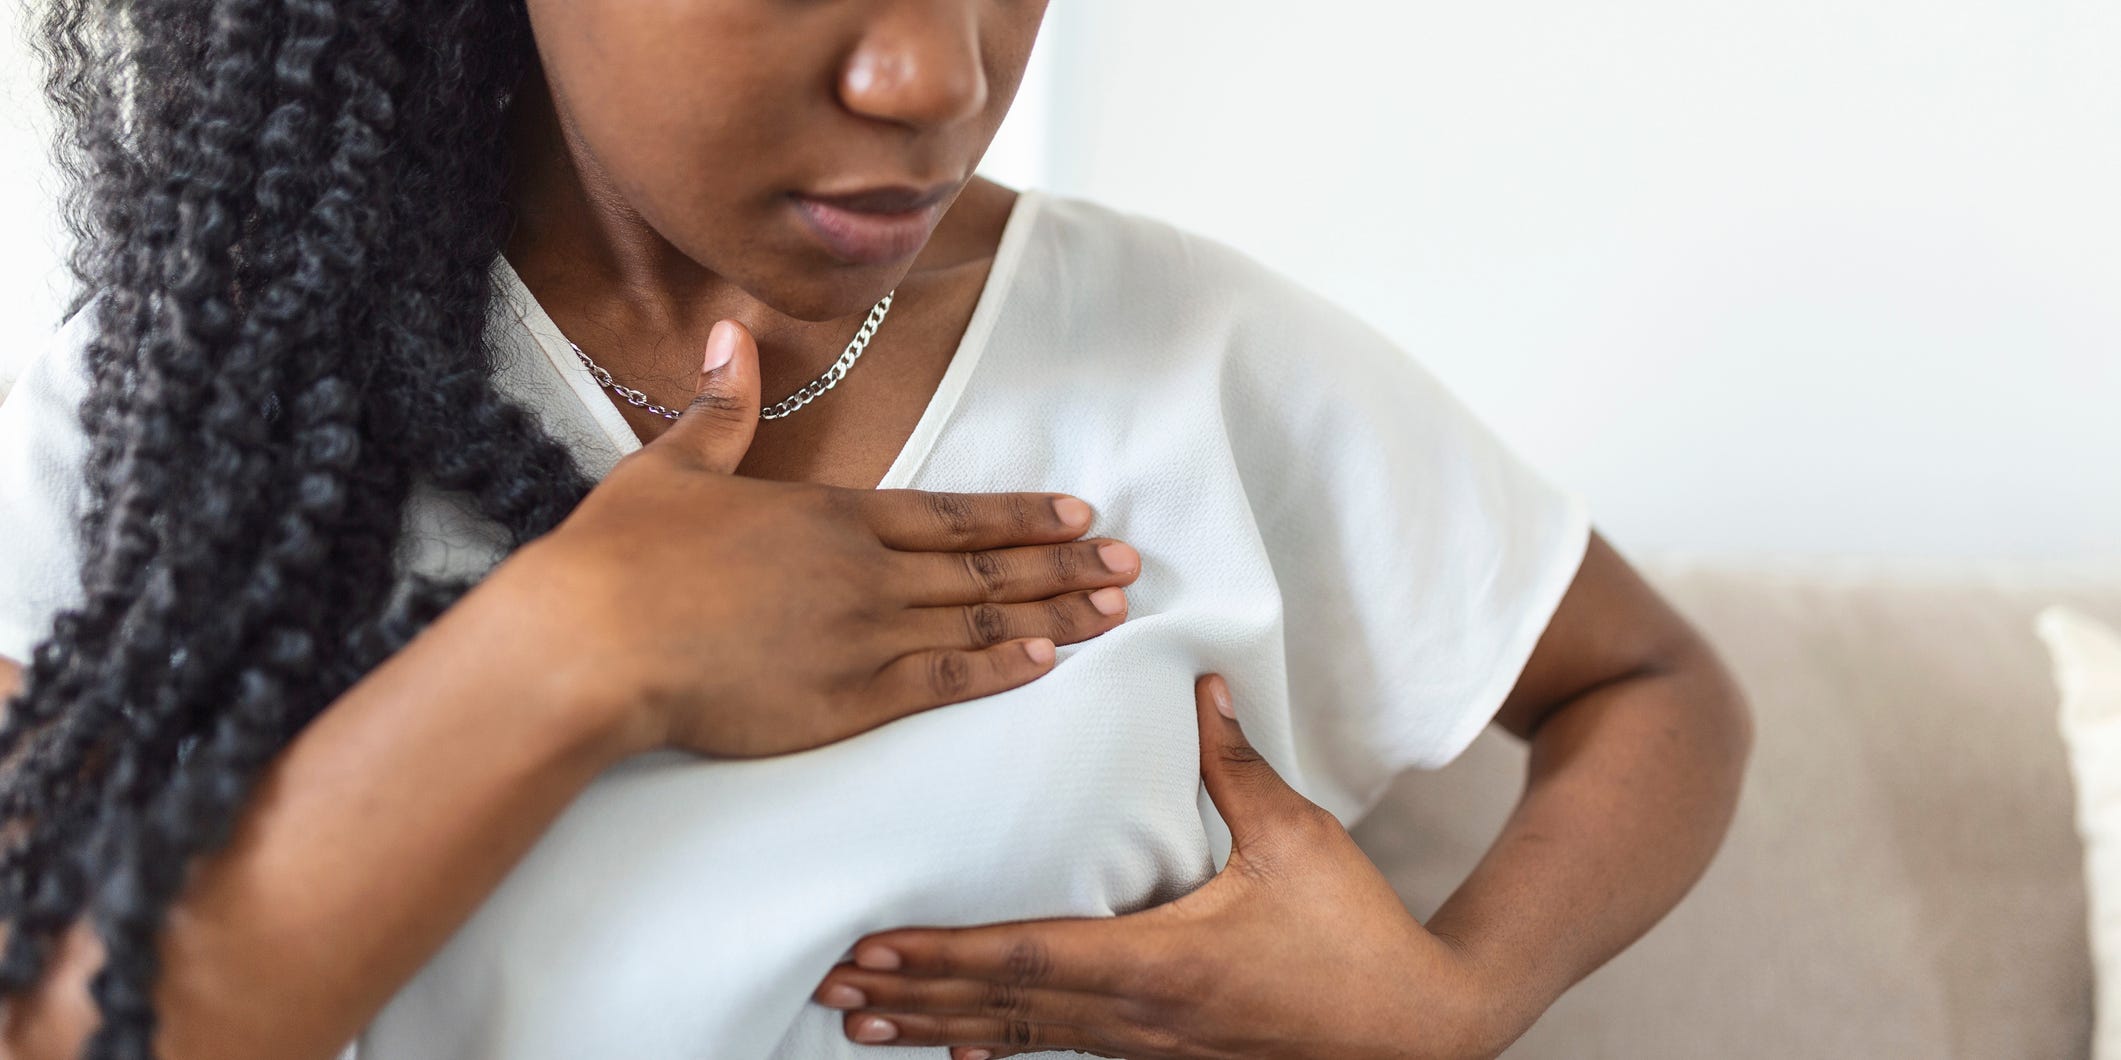 A Black woman holds her left breast as if checking for a lump.